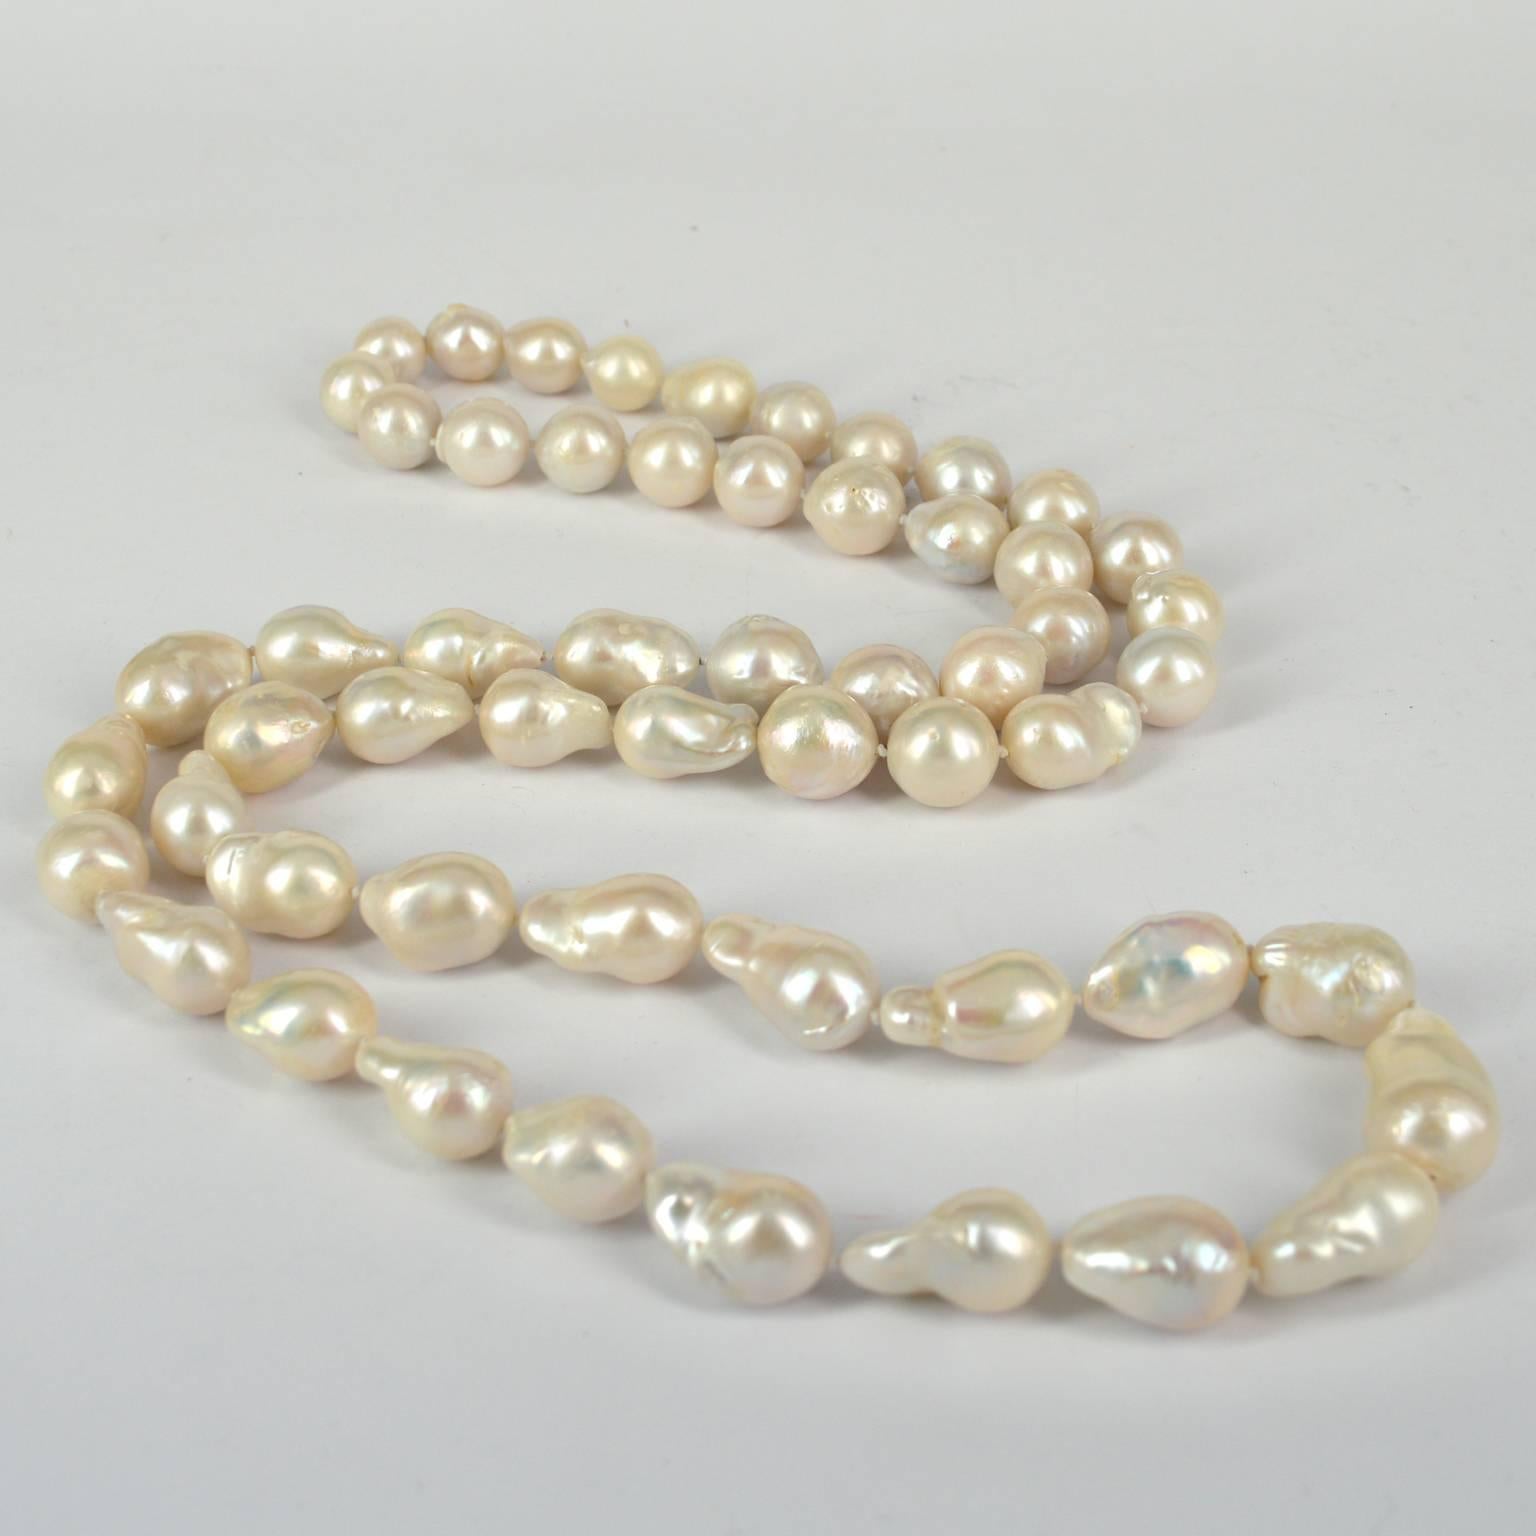 Modern Decadent Jewels Necklace of Graduating Baroque Pearls